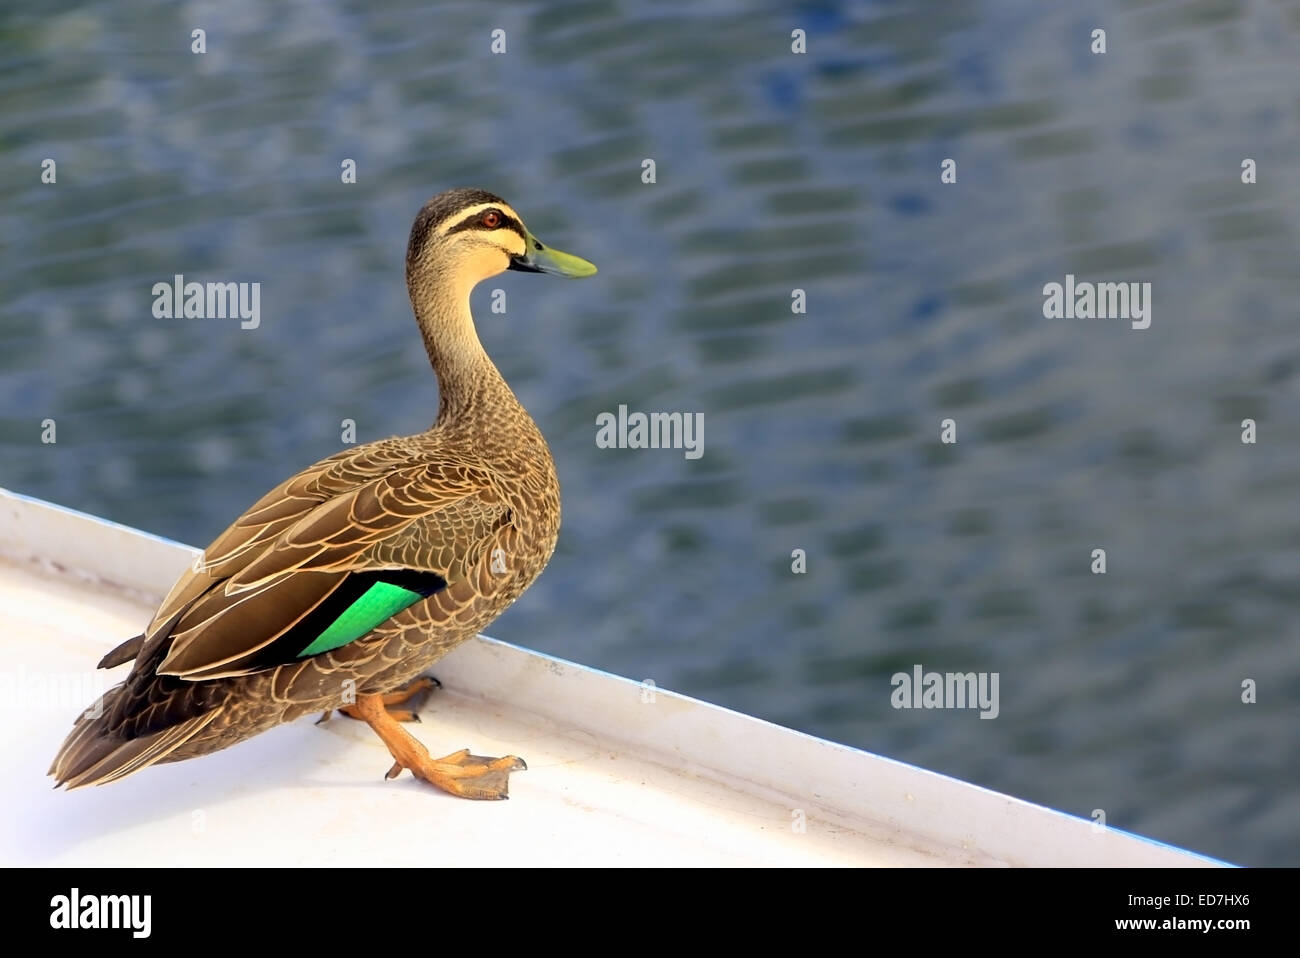 A wild duck (mallard) is standing on a white platform (part of a boat) and looking out into the water below. Stock Photo